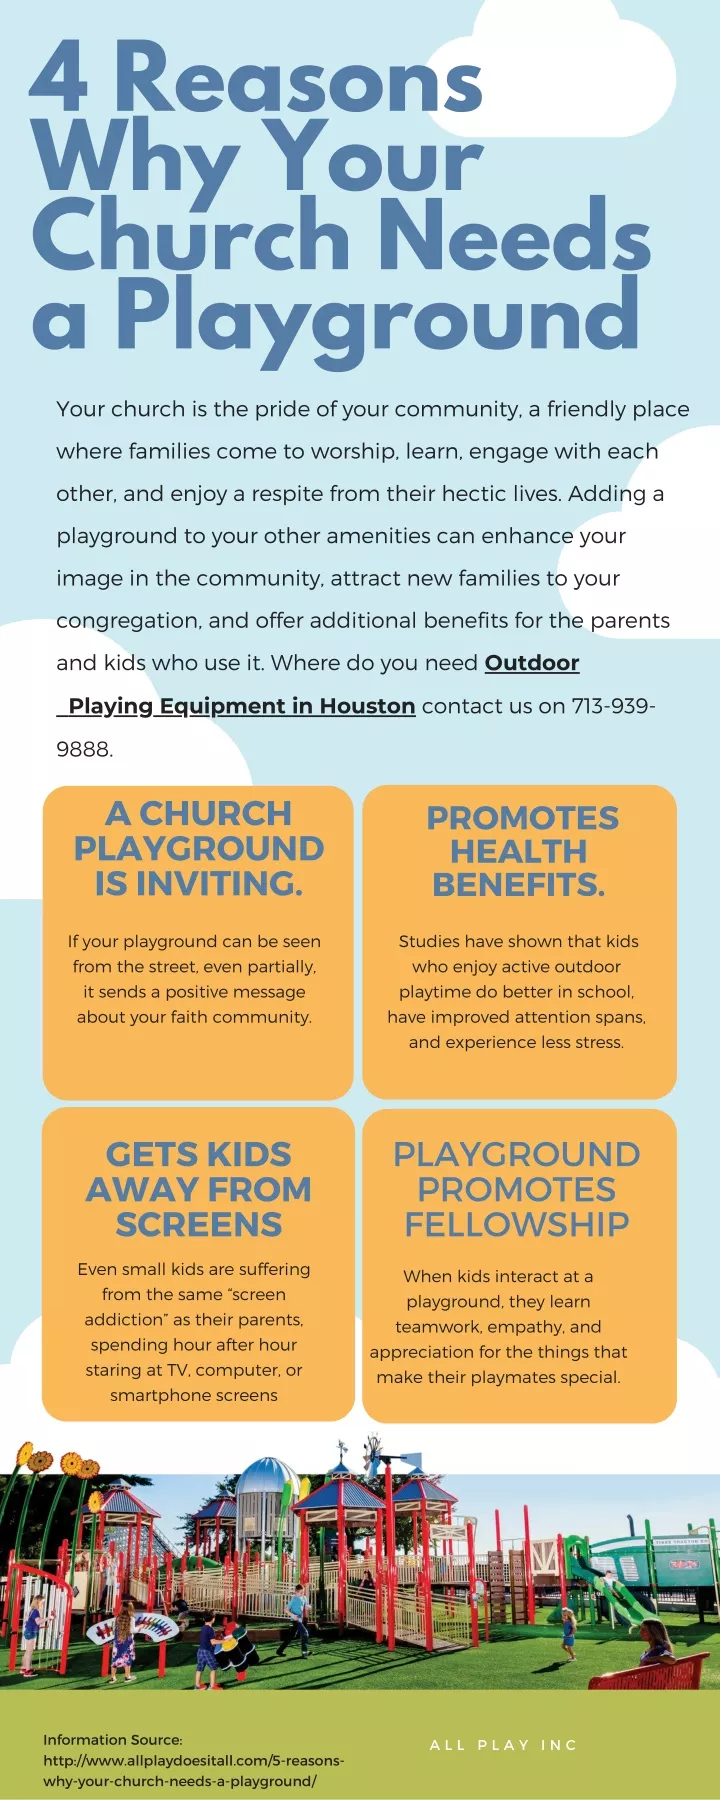 4 reasons why your church needs a playground